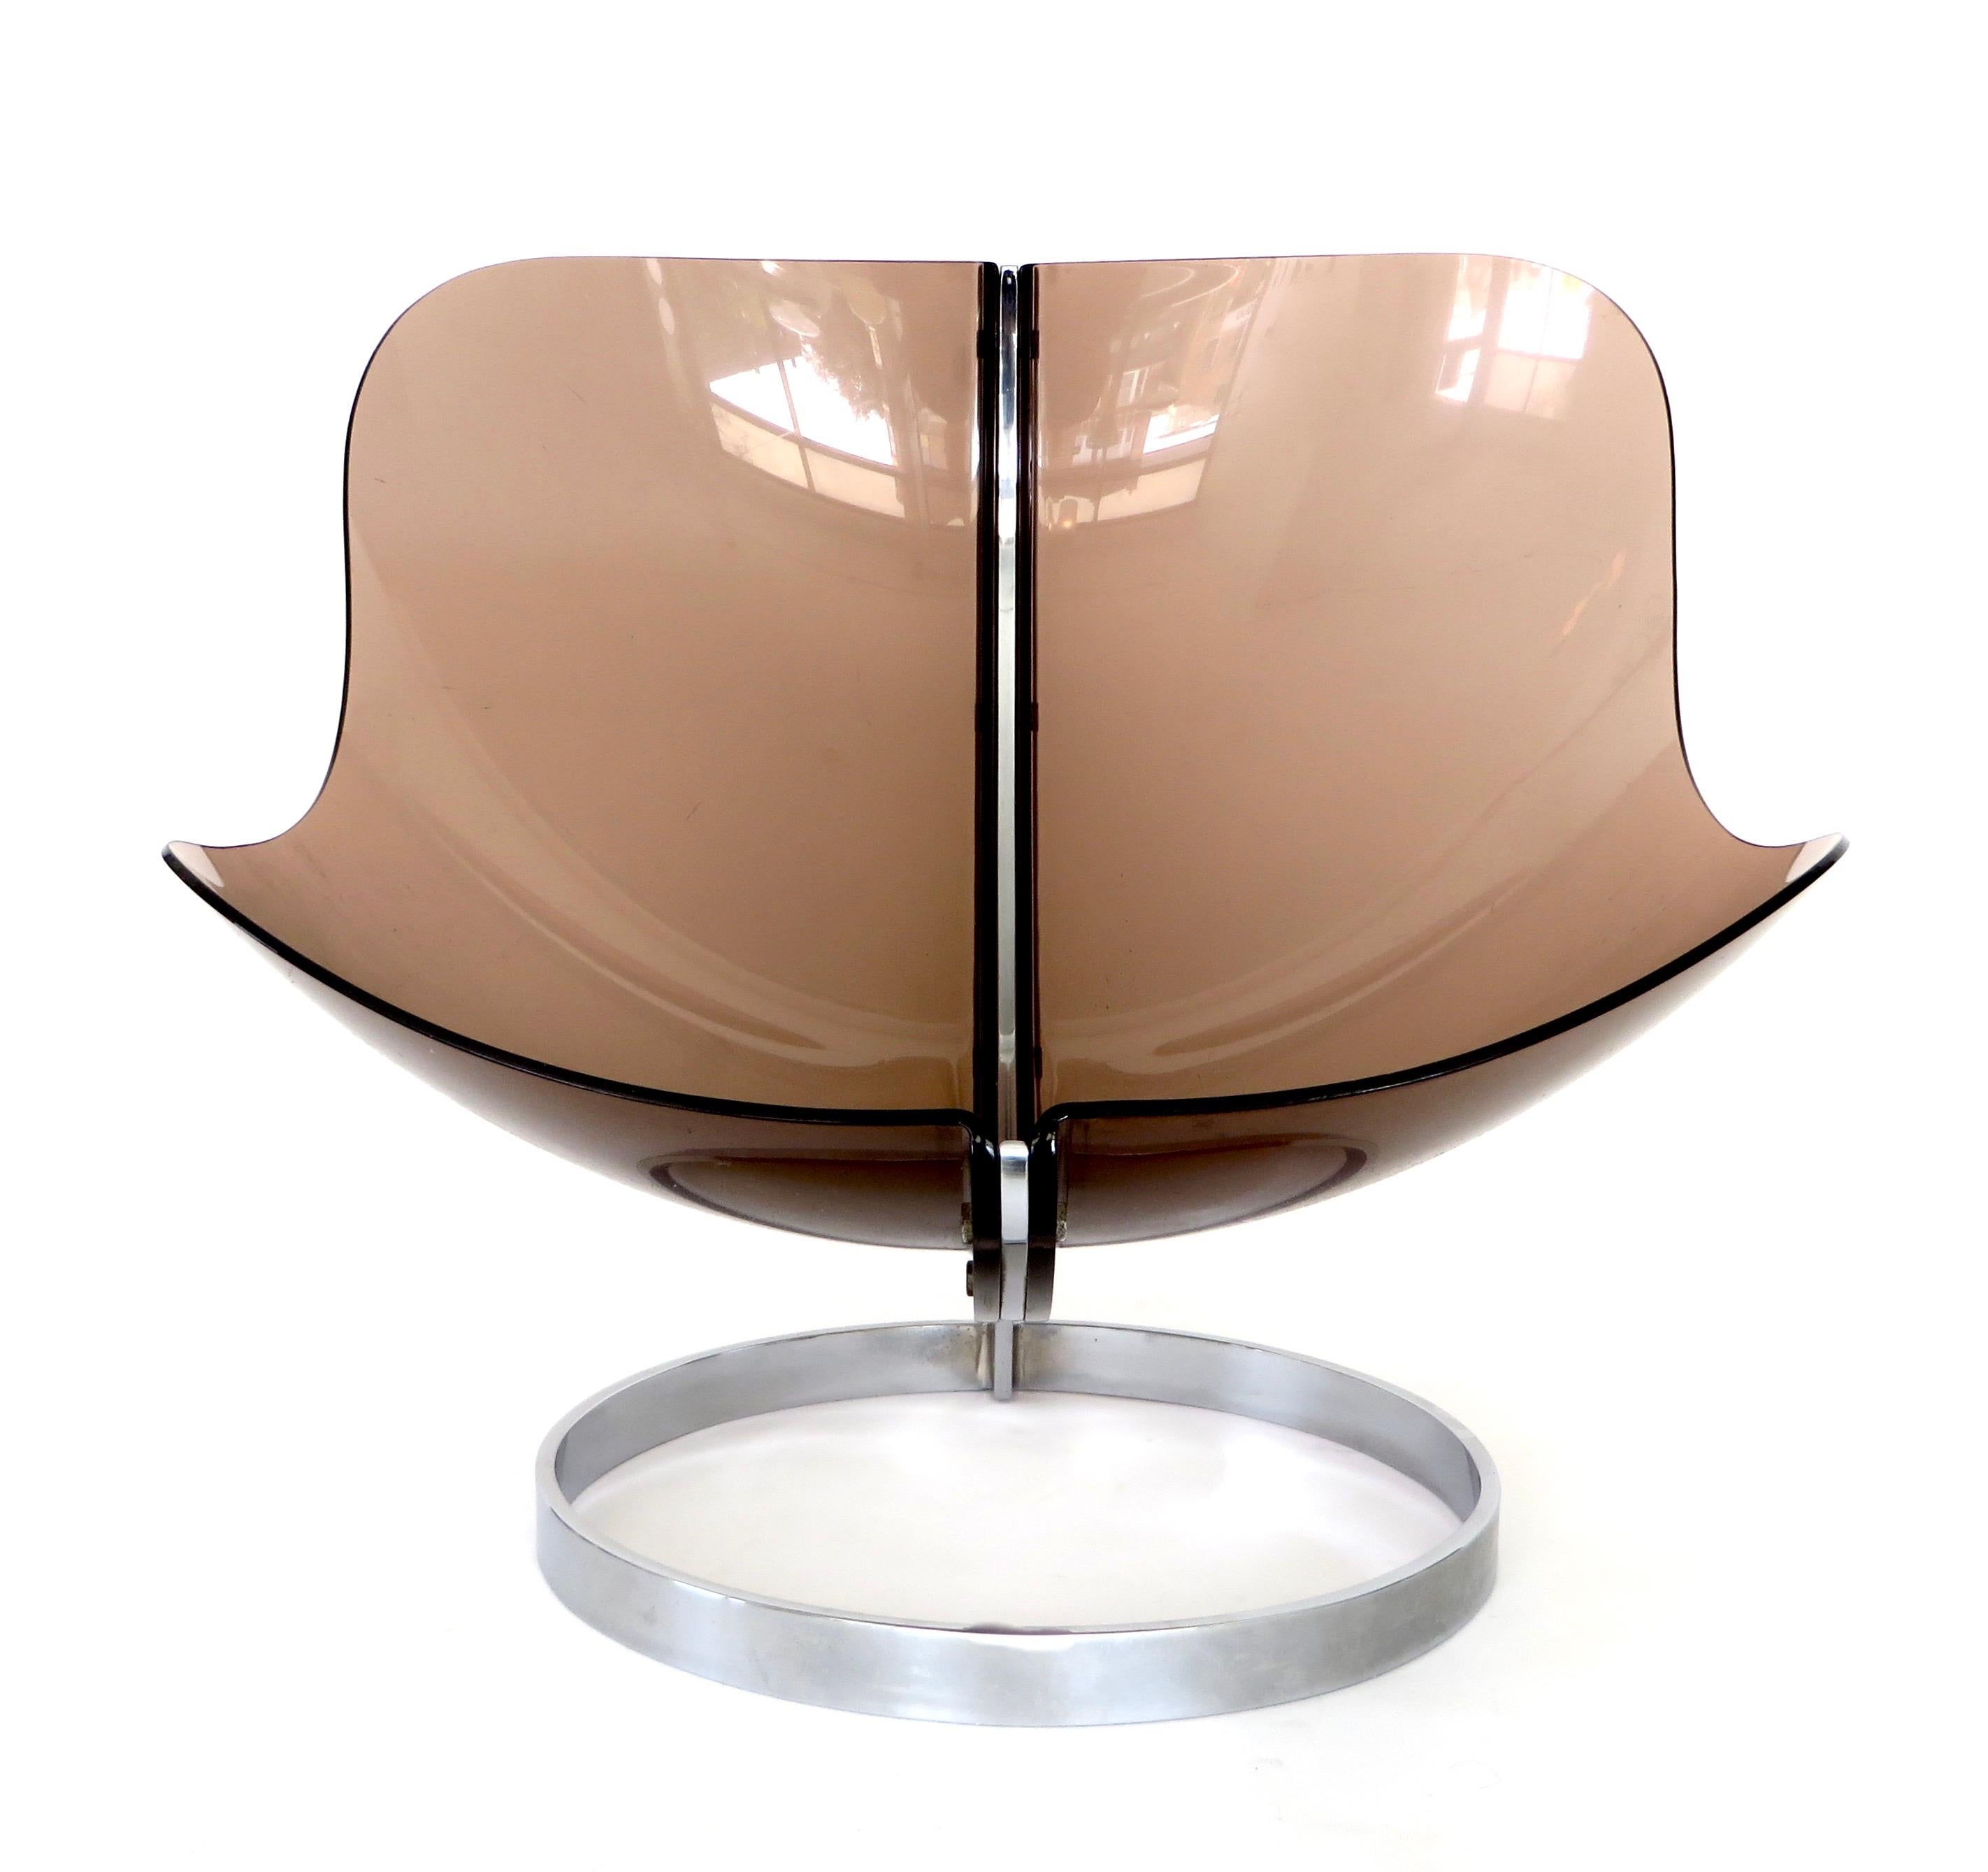 Boris Tabacoff French Sphere Chair Lucite Altuglas and Chrome c1971 For Sale 8